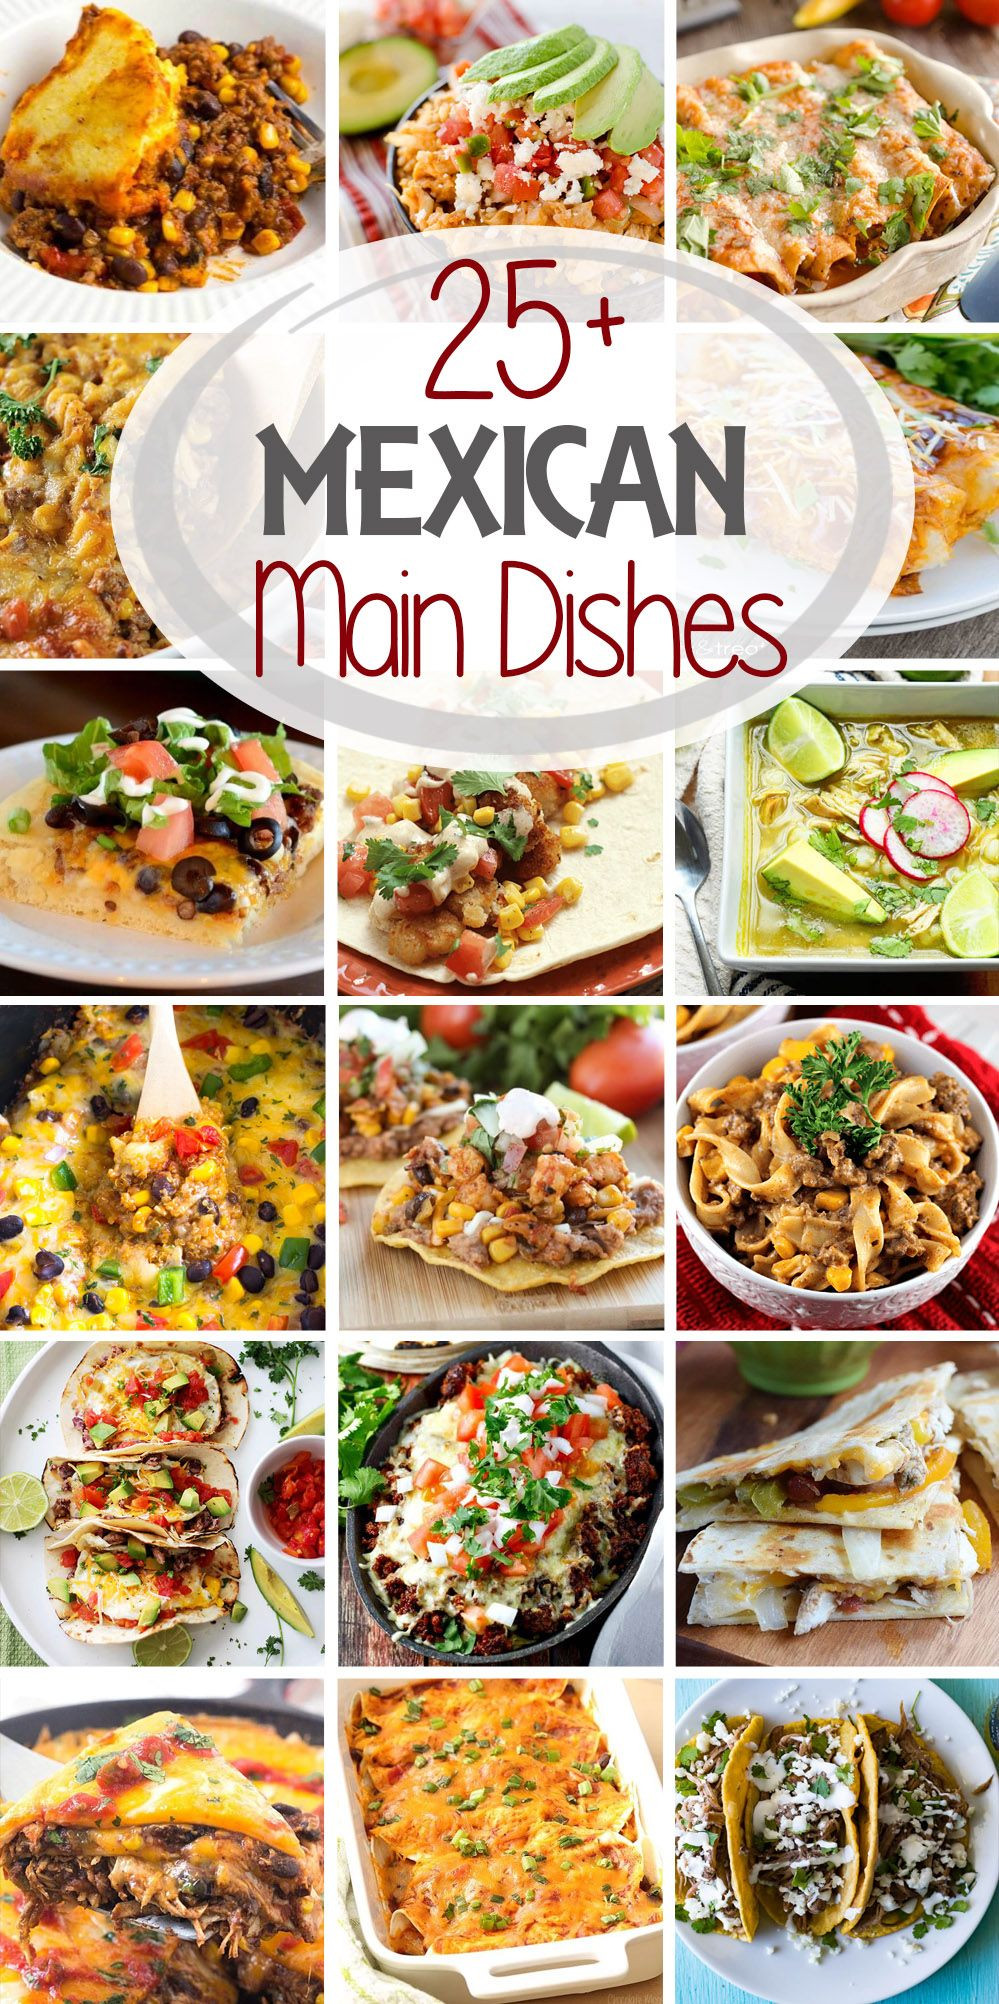 Authentic Mexican Main Dishes
 25 Mexican Main Dish Recipes